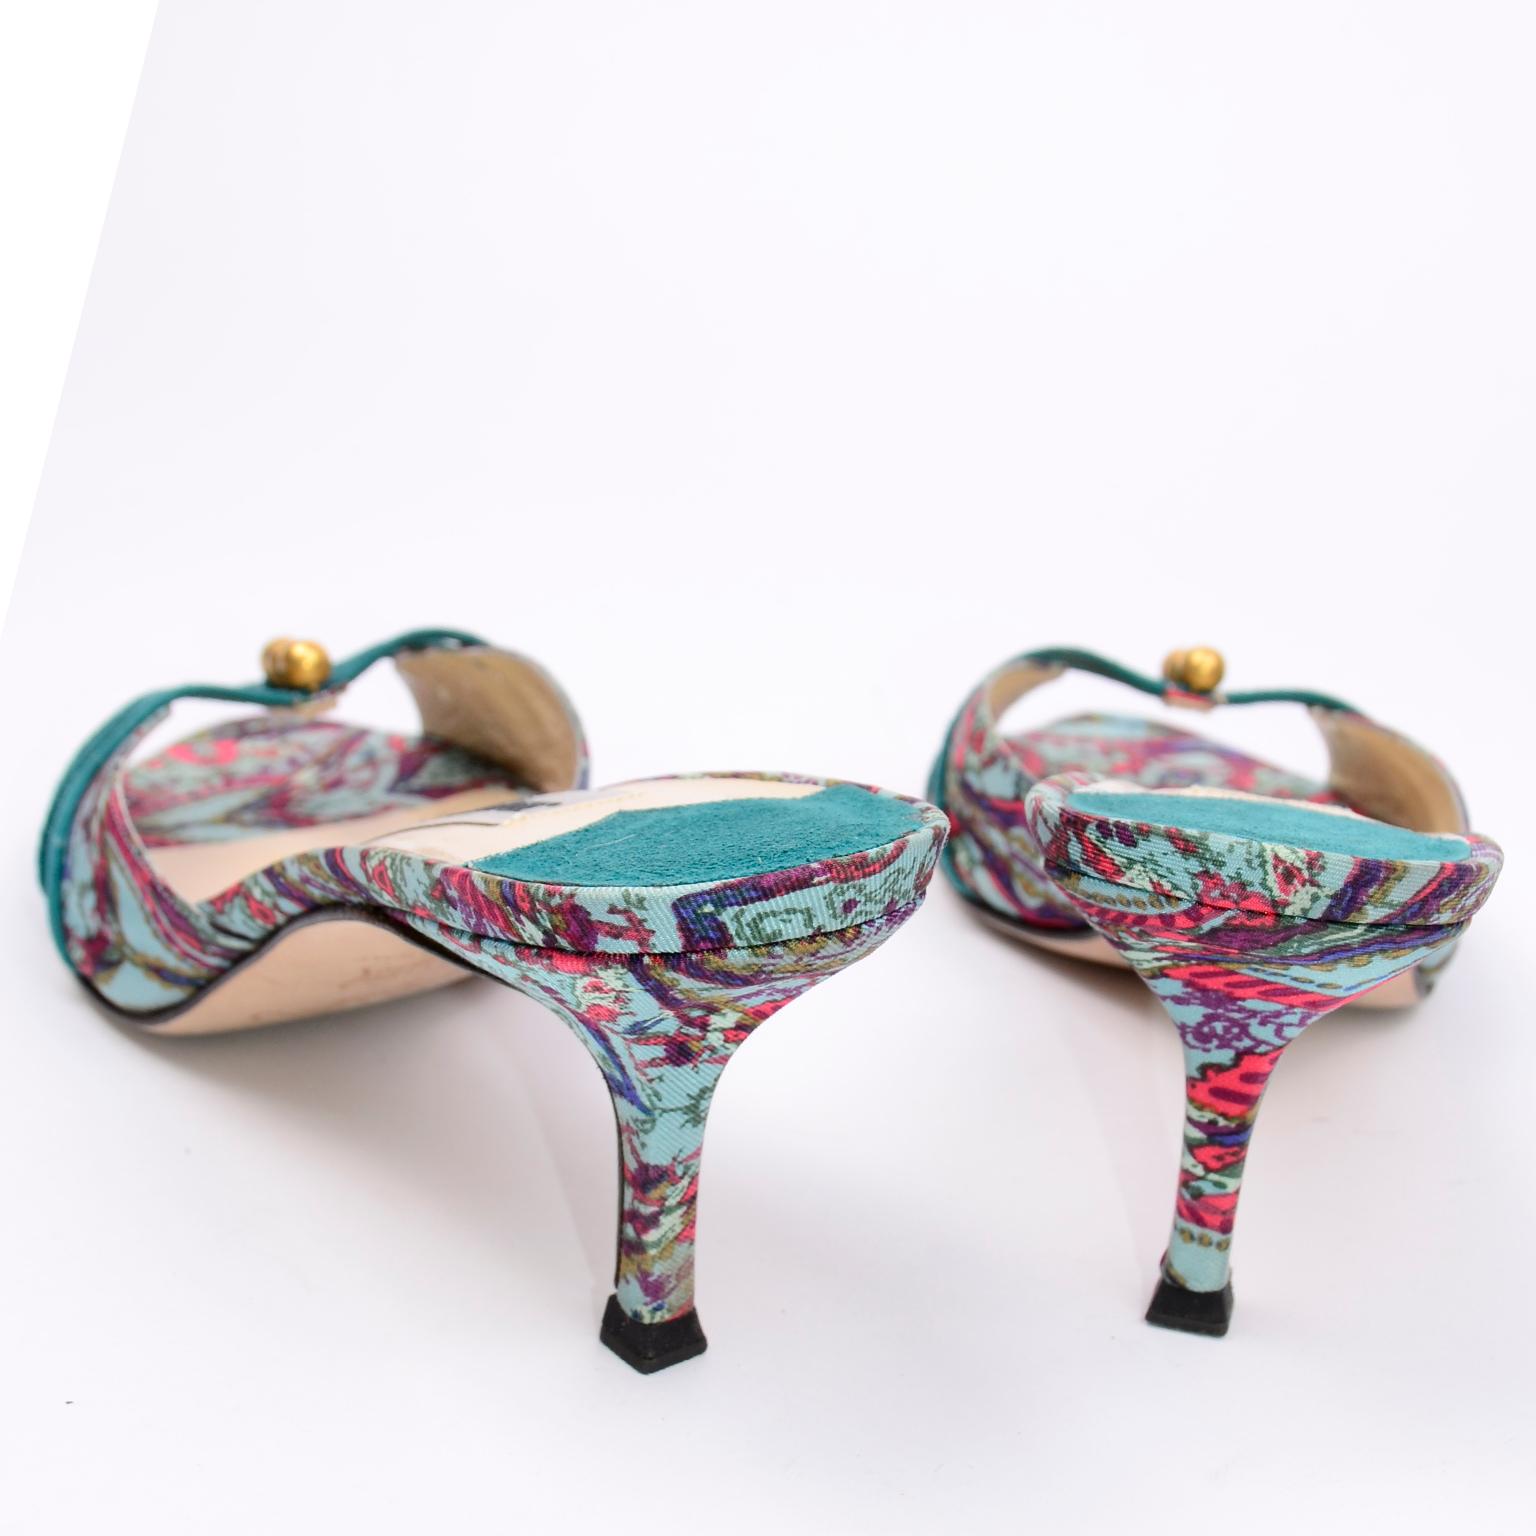 Gray Jimmy Choo London Colorful Mules Shoes in Turquoise Print W Heels & Gold Beads